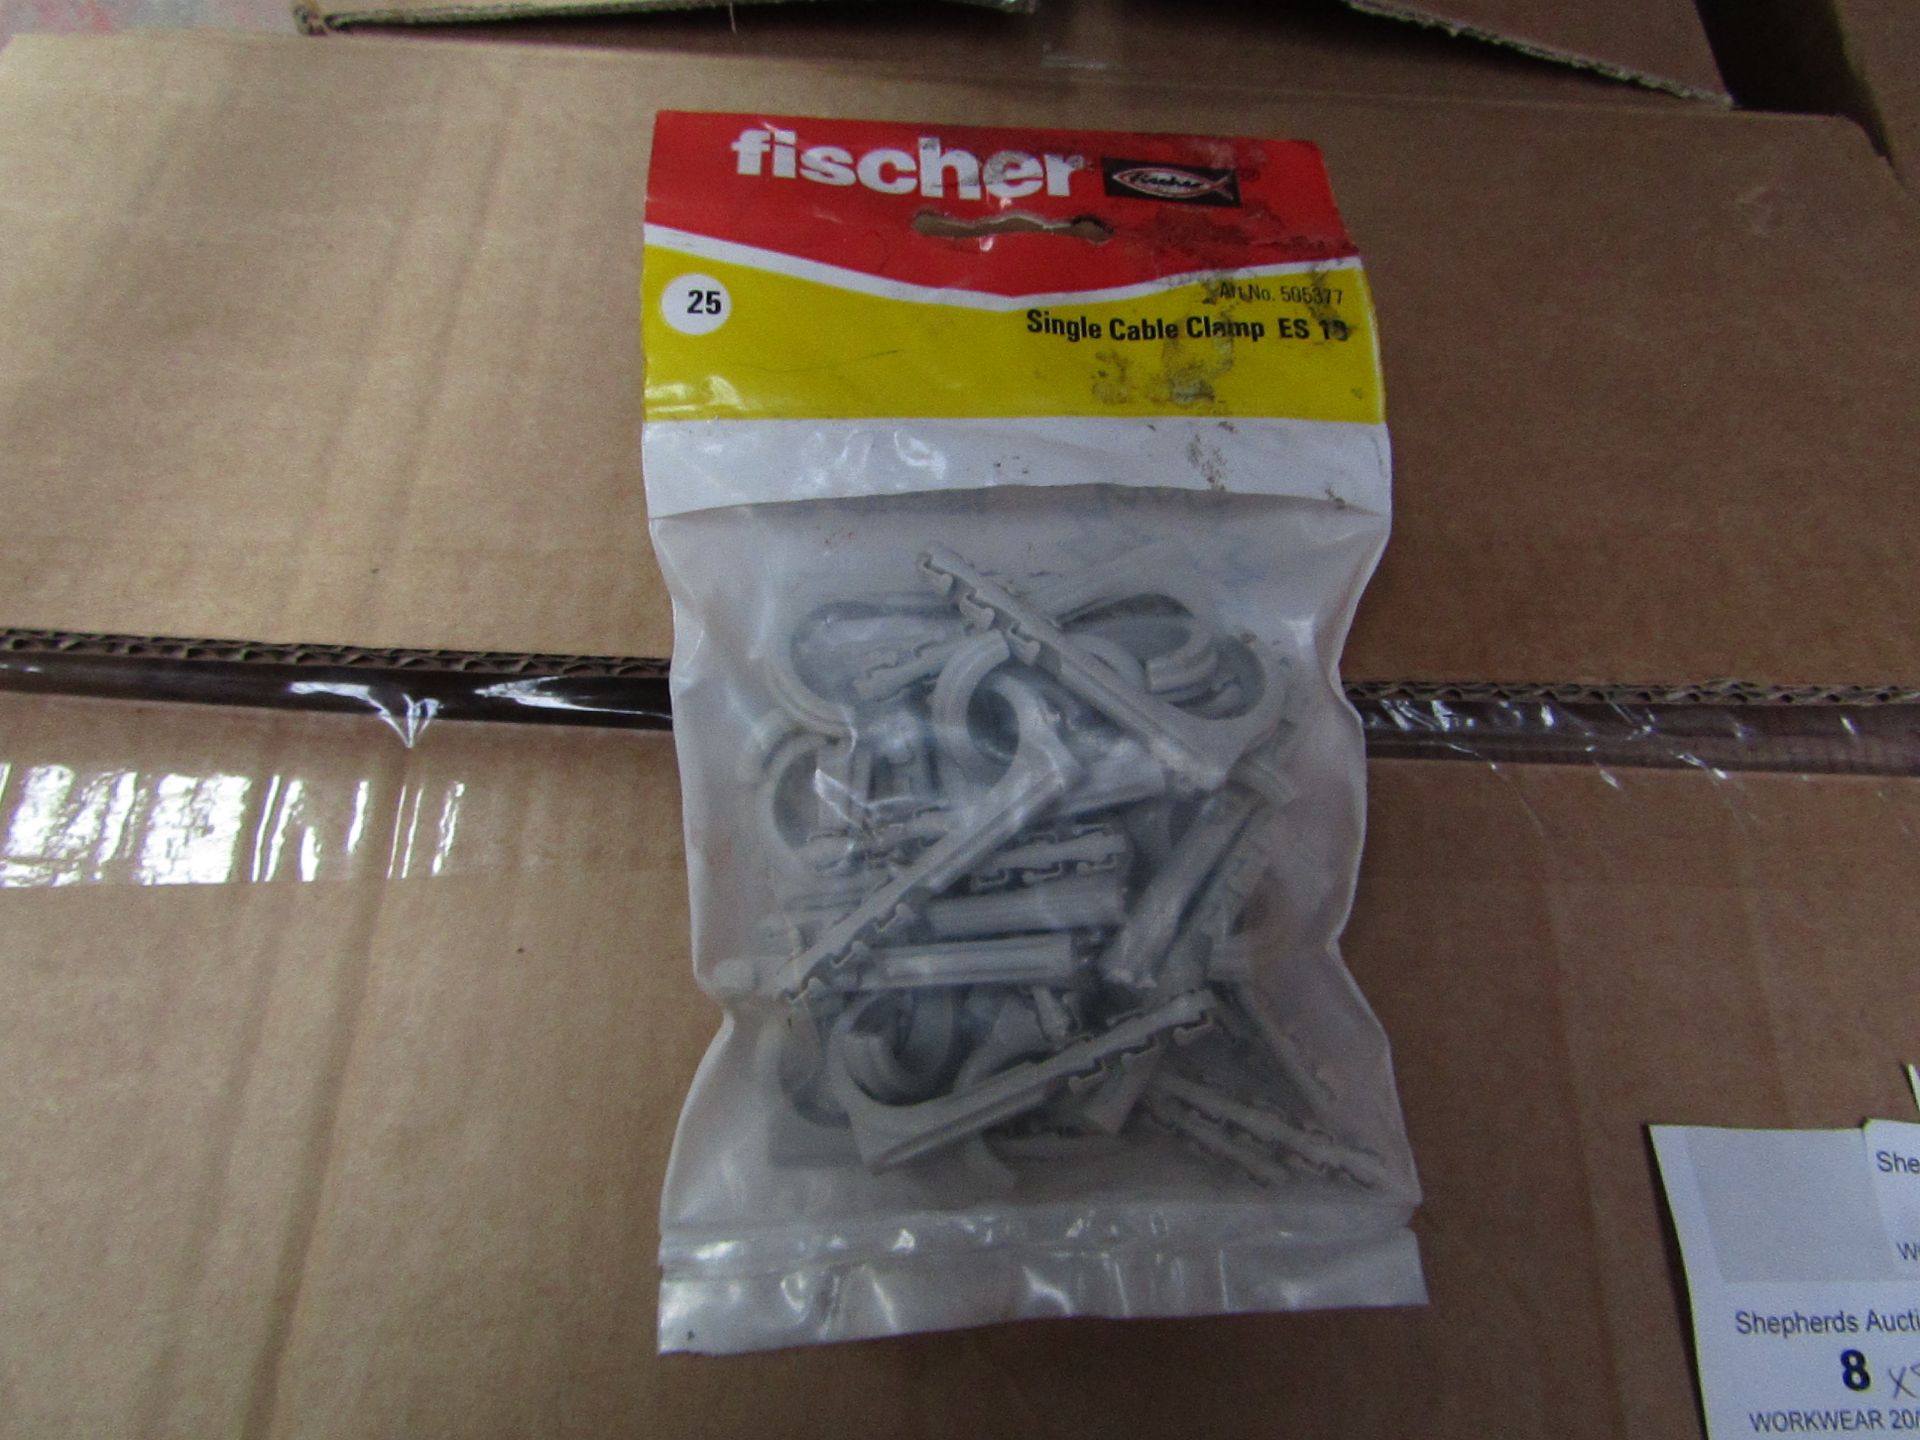 5x Fischer - Single Cable Clamp ES 18 - (Packs of 25) - New & Packaged.